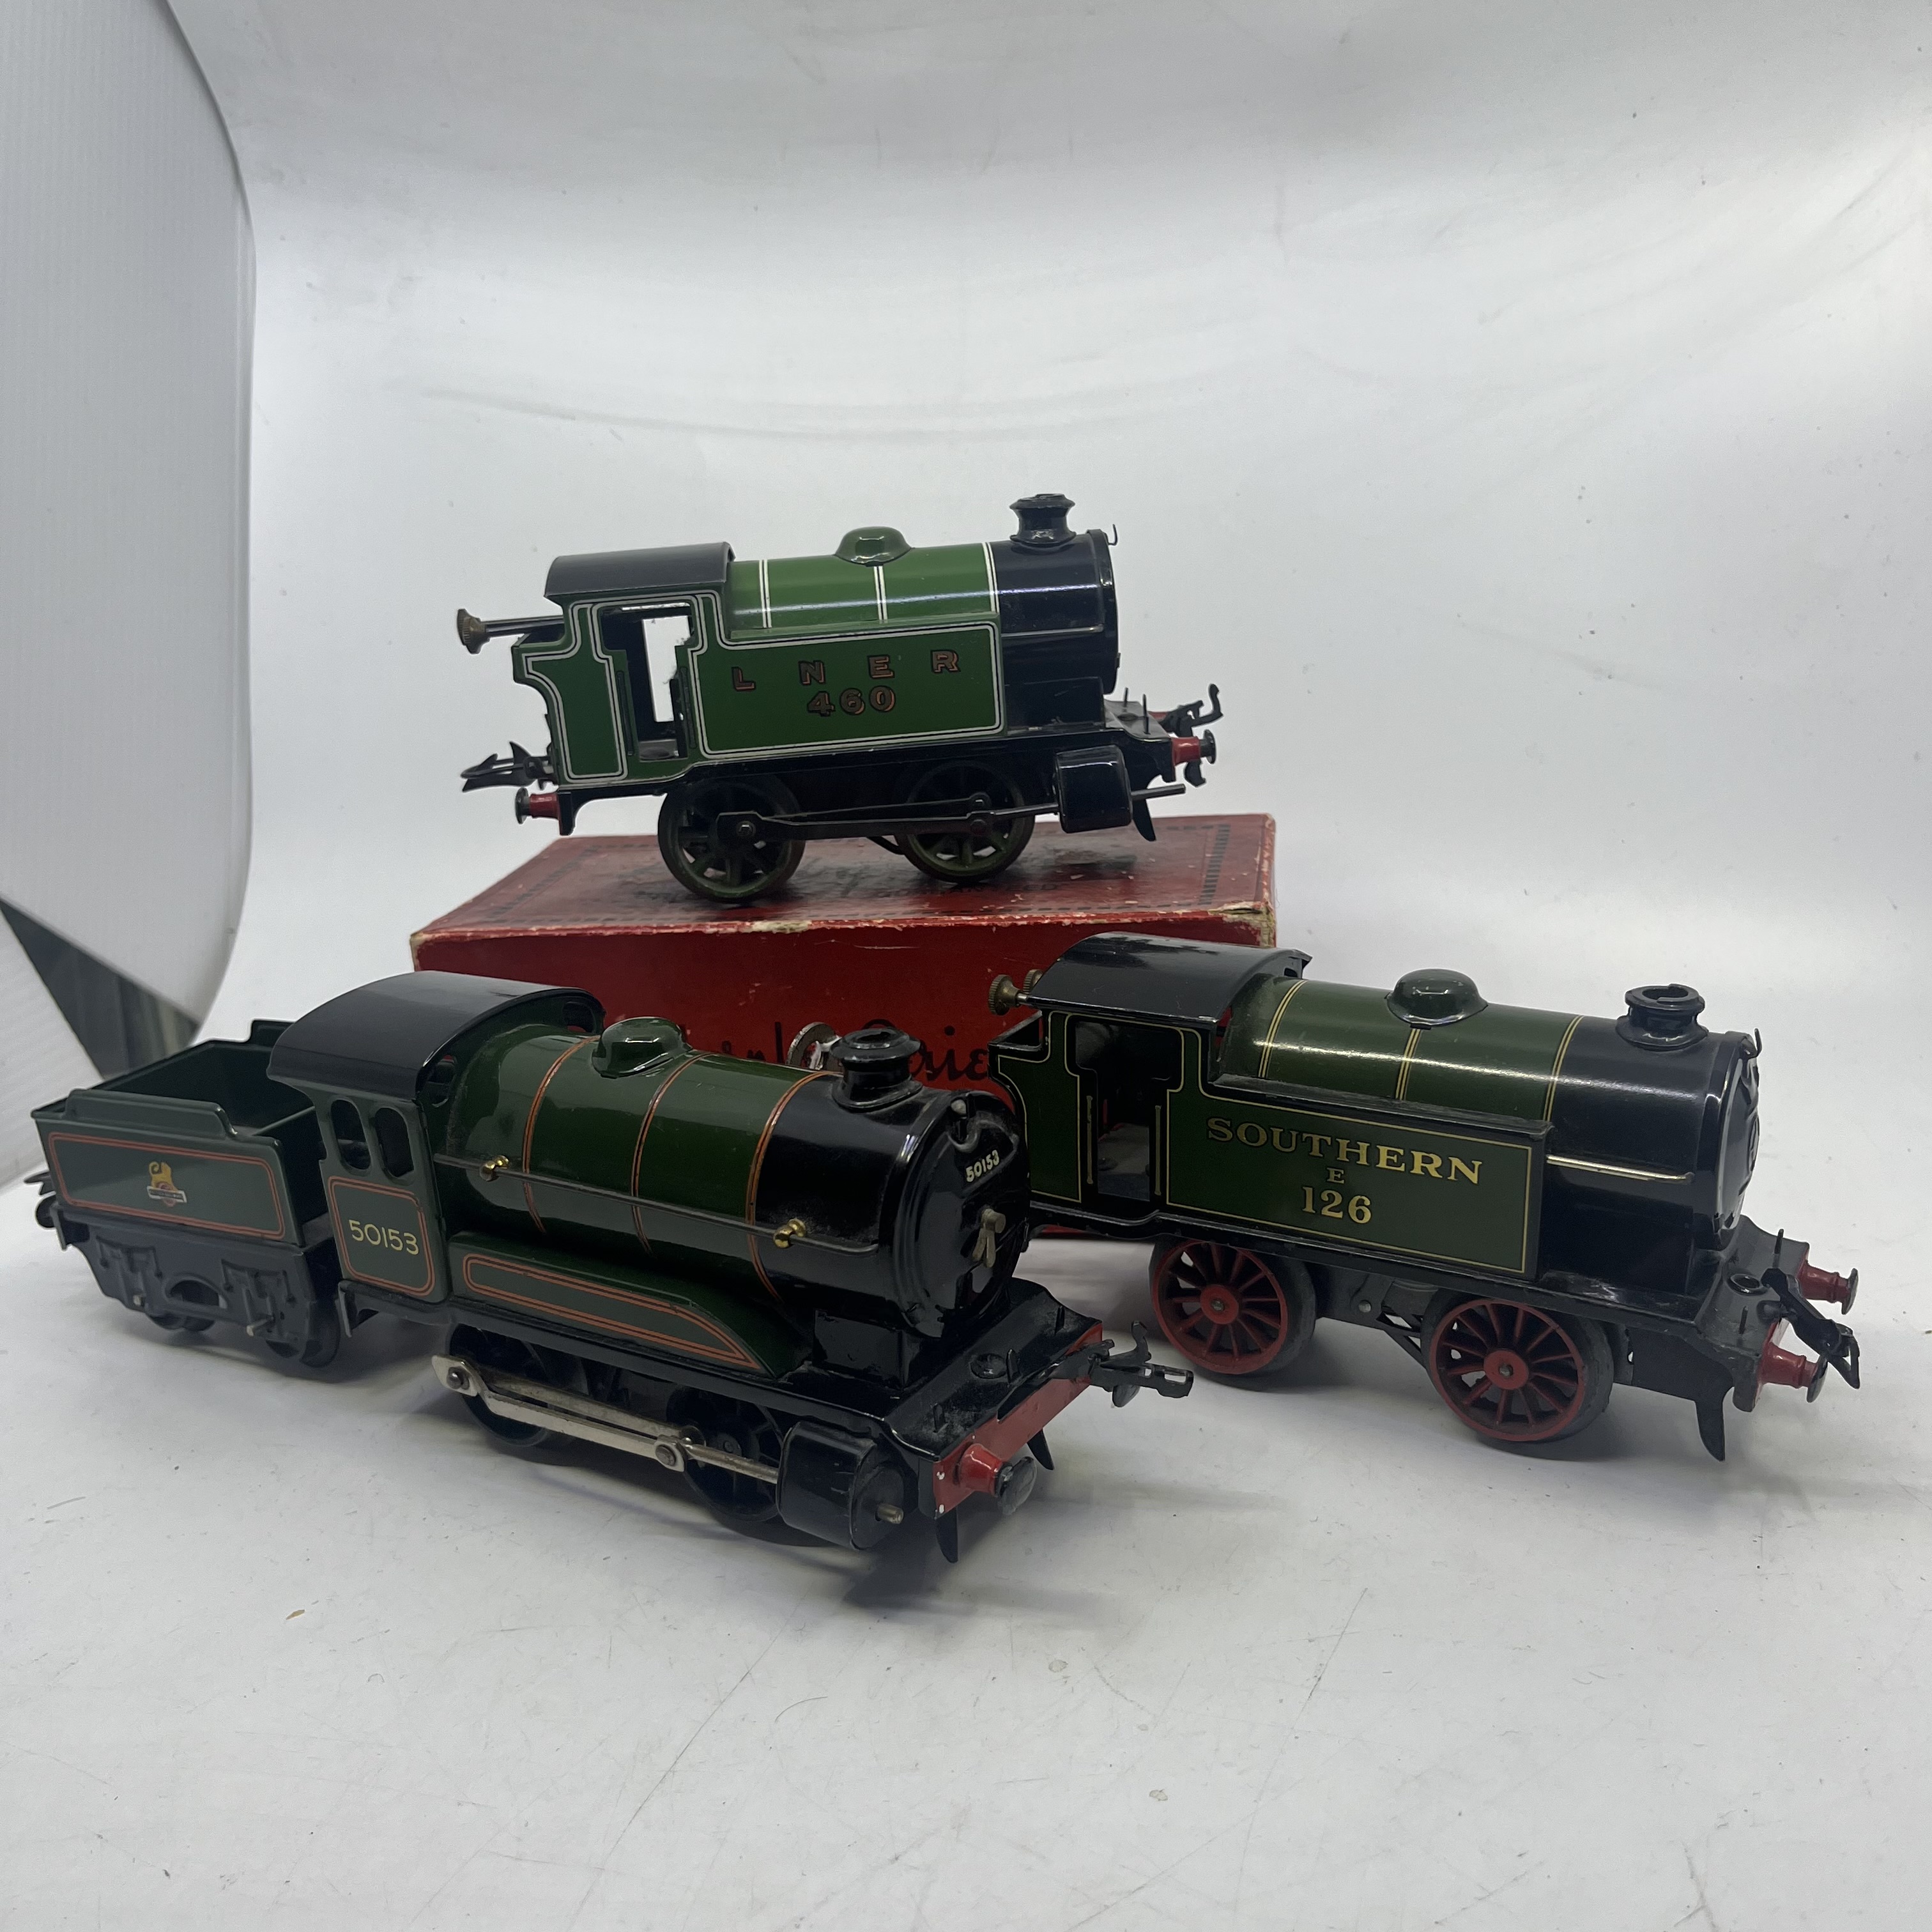 Hornby O Gauge antique railway interest: from a significant, private collection collected from